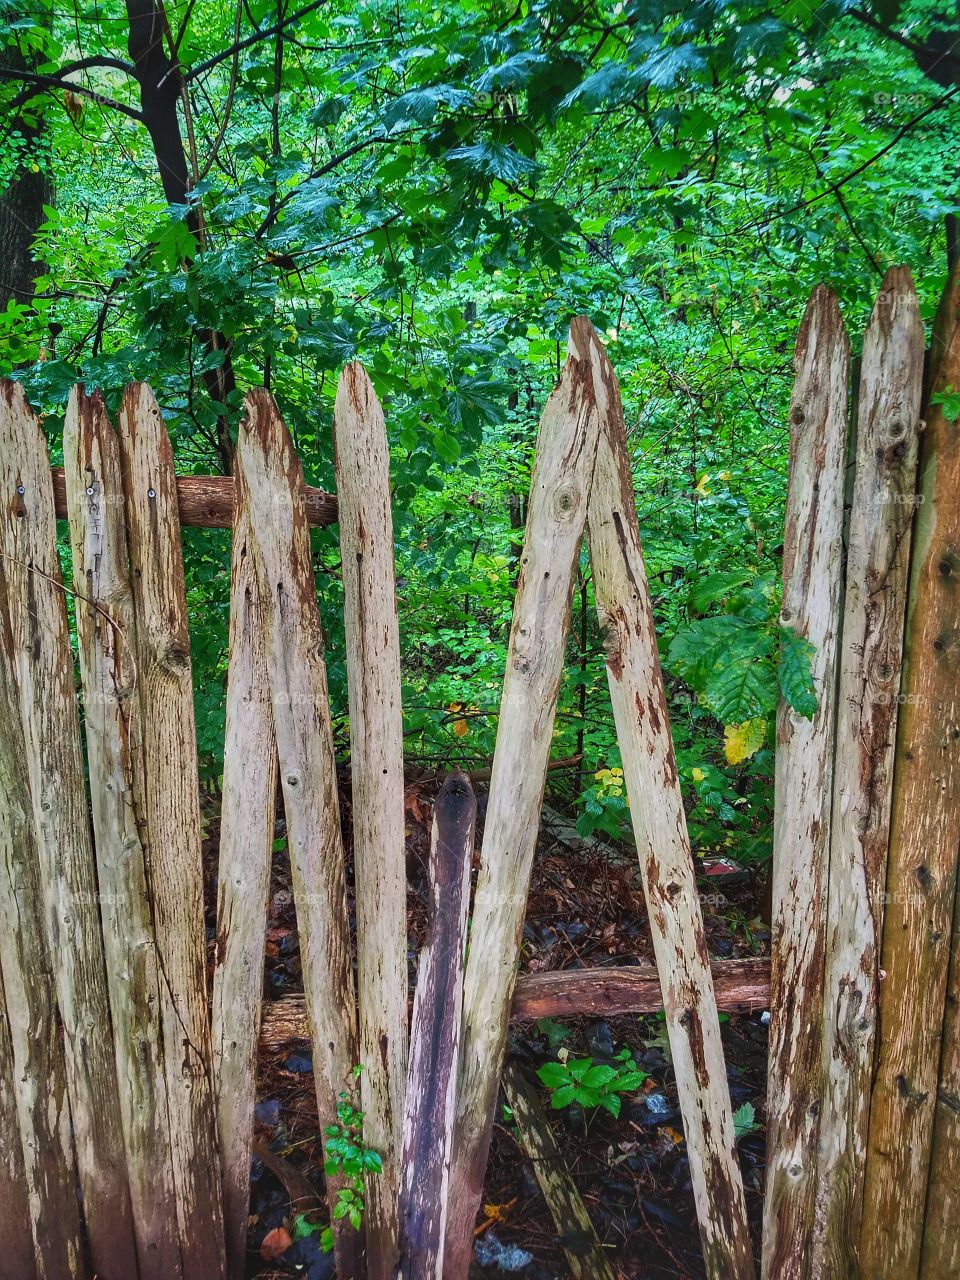 This old Fence